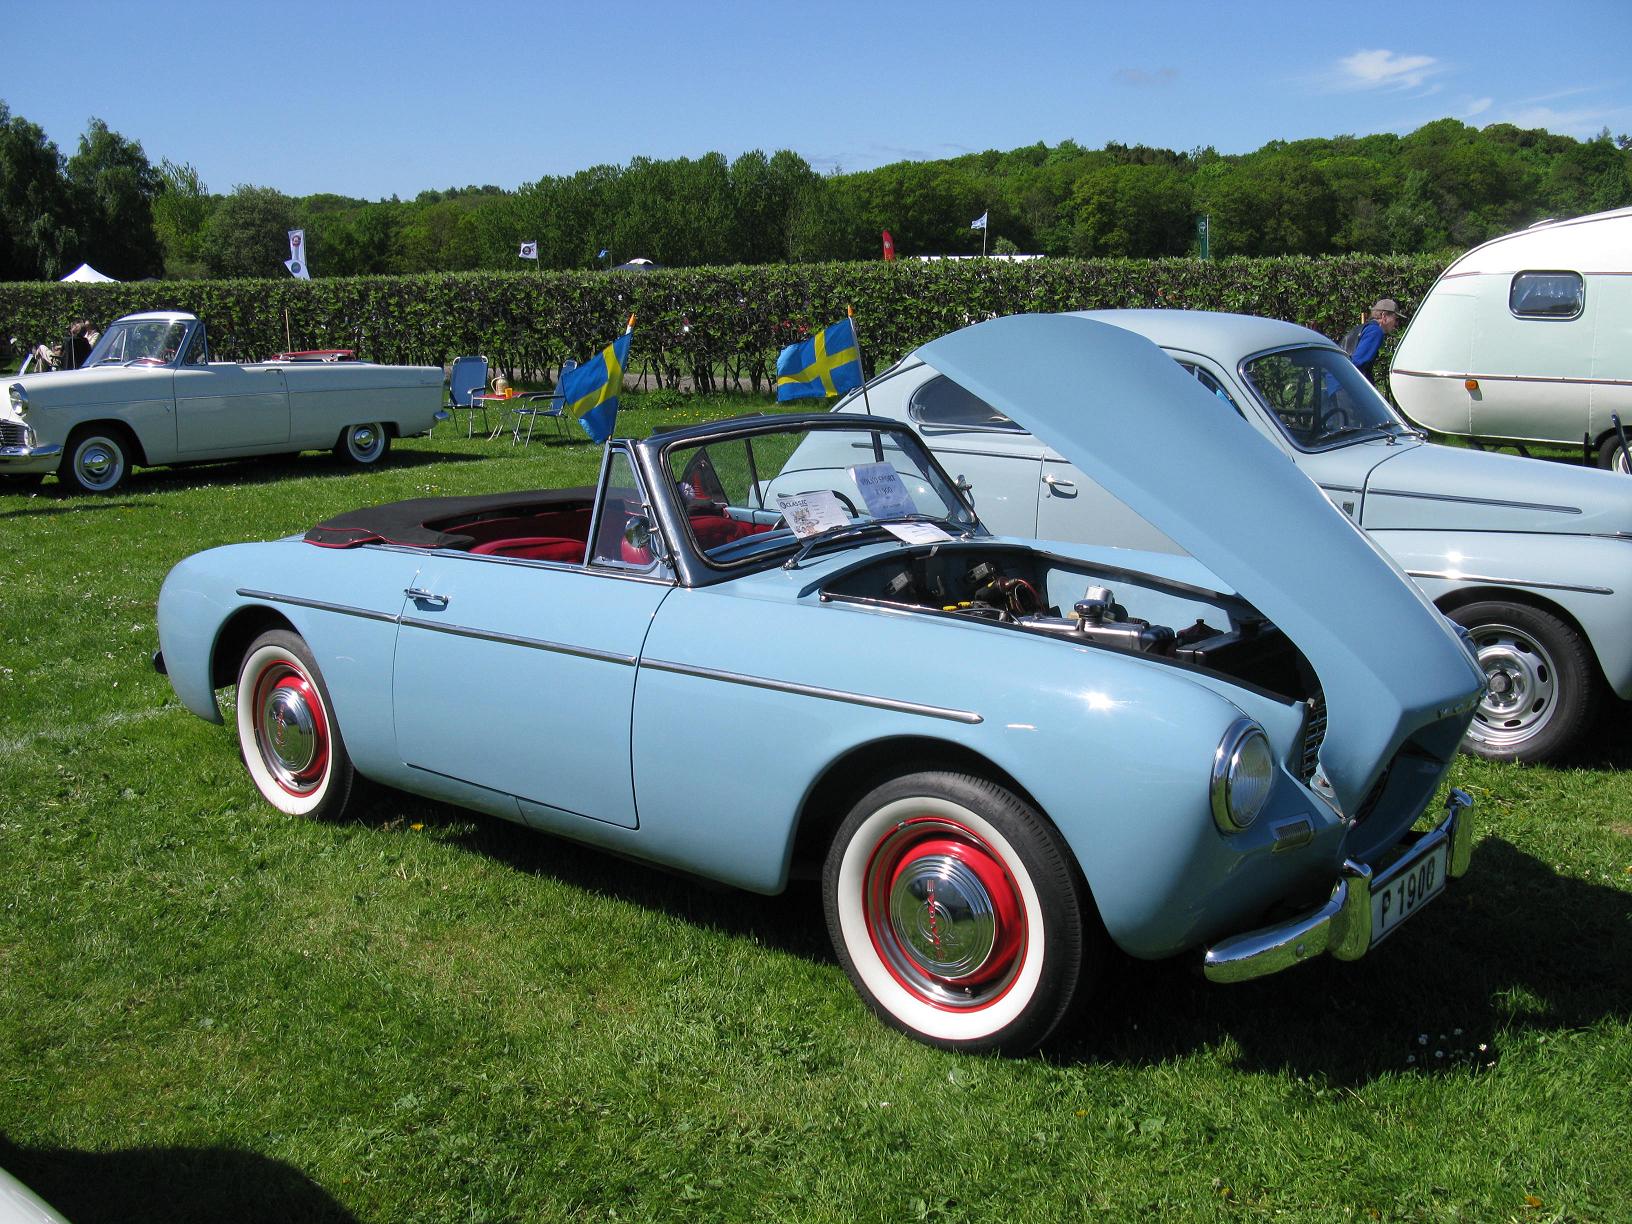 a blue convertible parked in a grassy field next to other cars